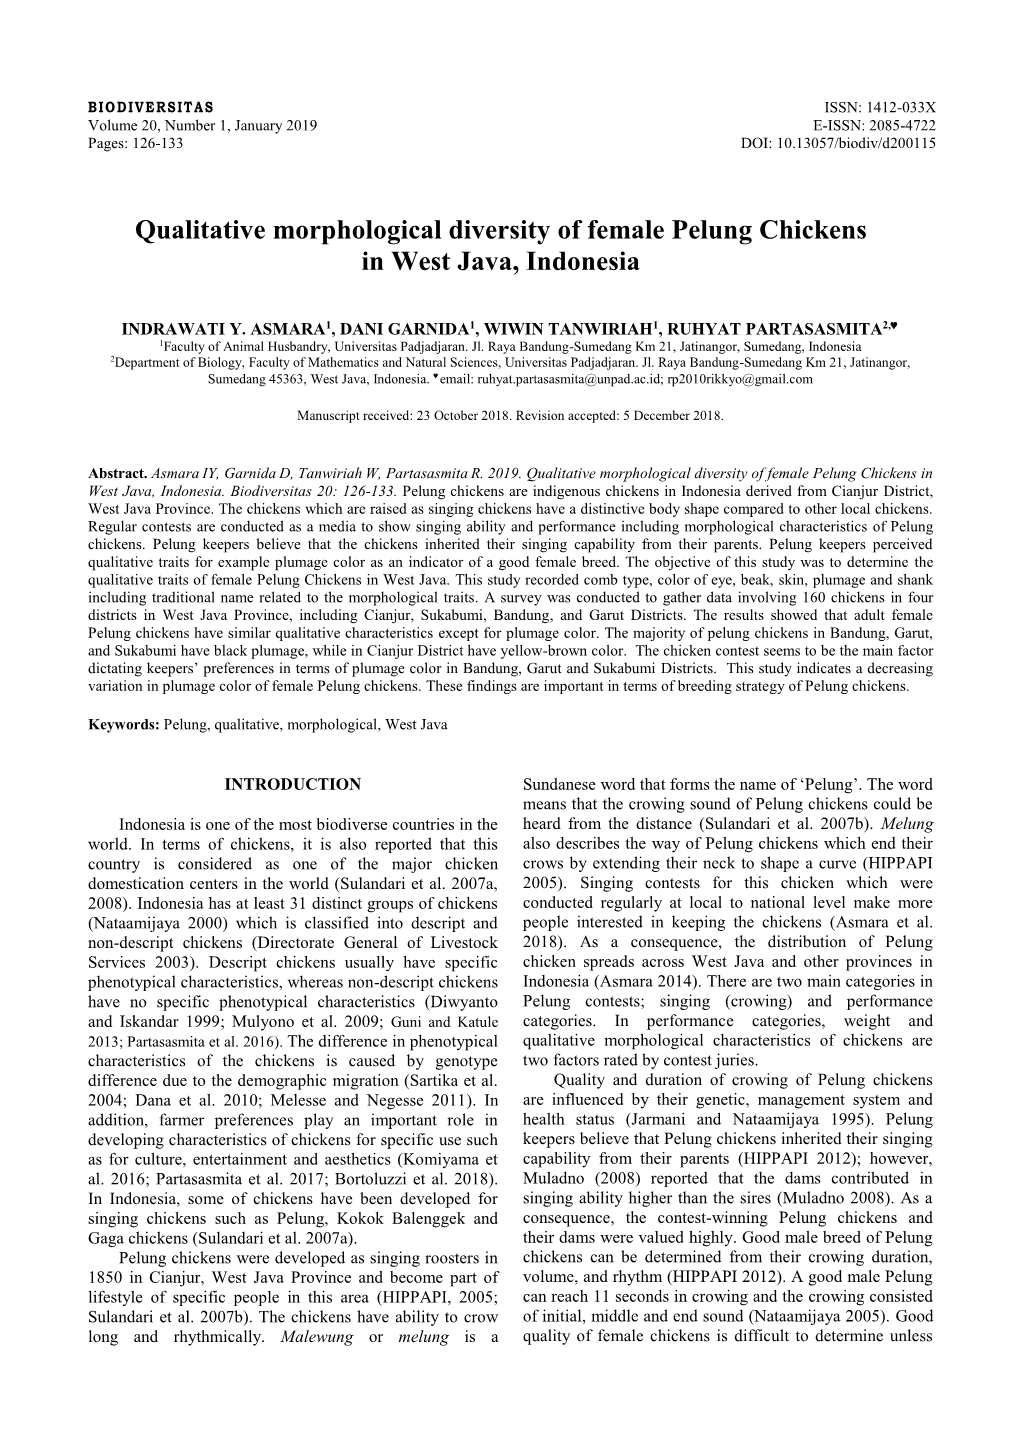 Qualitative Morphological Diversity of Female Pelung Chickens in West Java, Indonesia